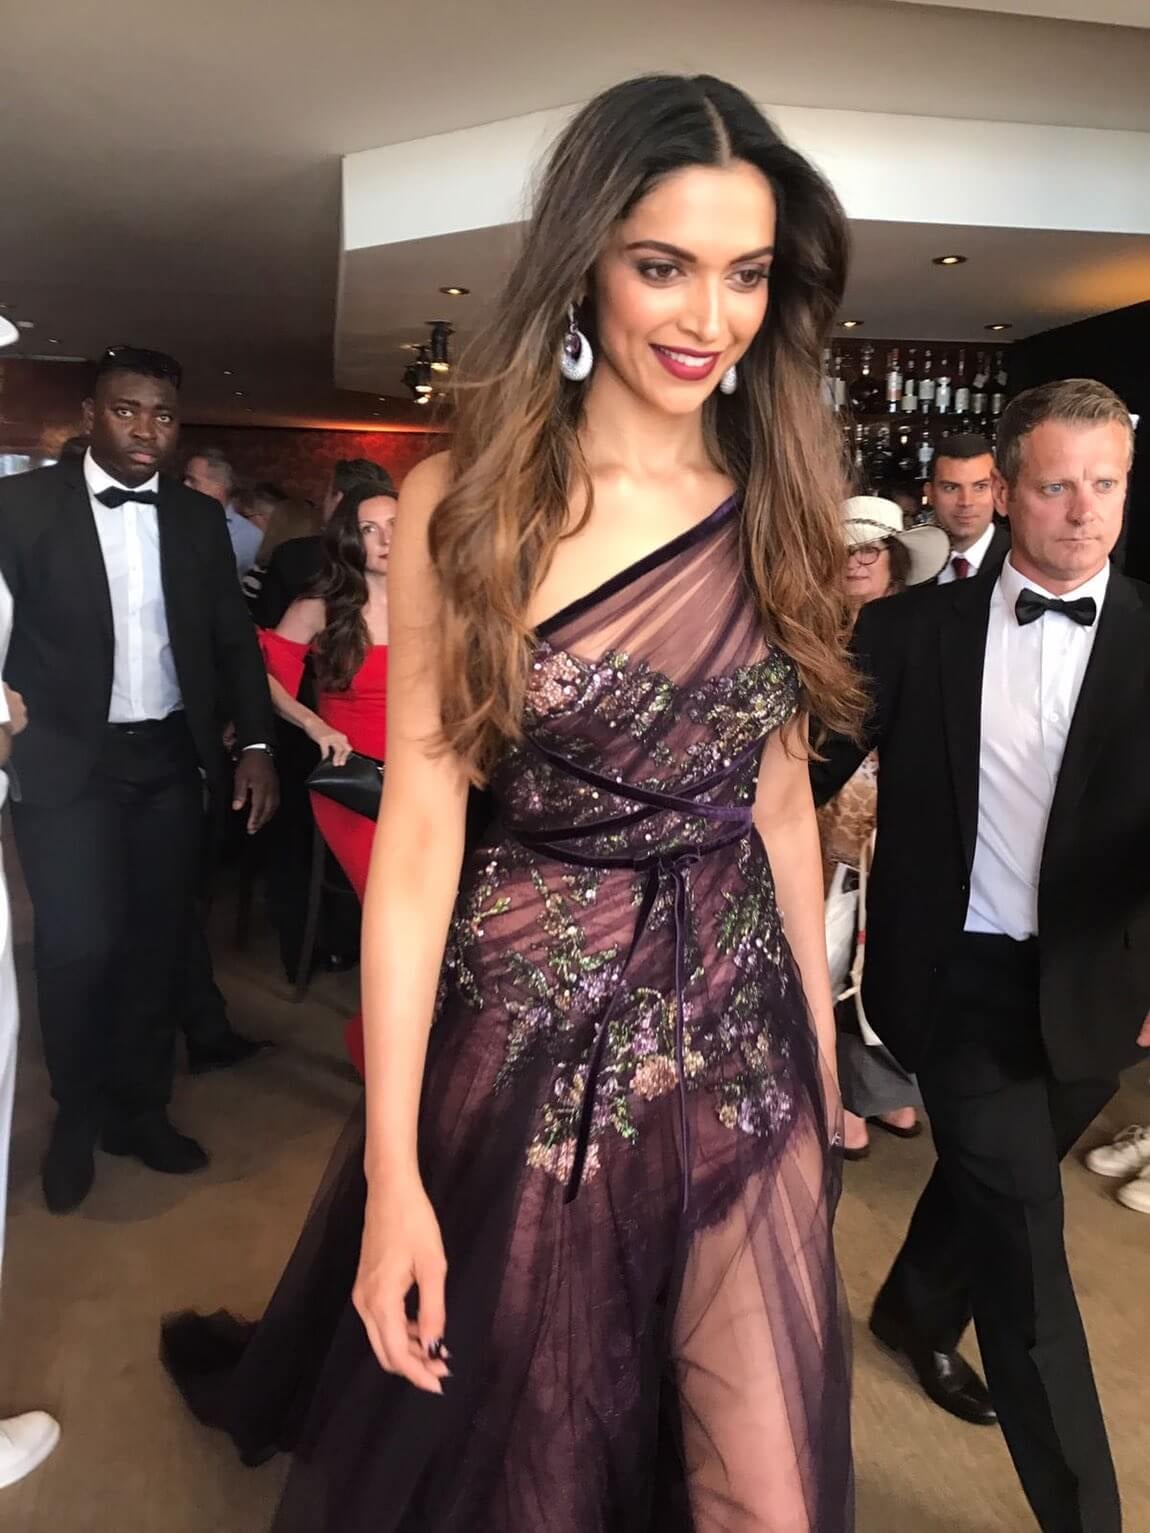 thequint%2F2017-05%2F44cb82e0-5732-4a9d-aaf2-53e4b1054f60%2FFirst Look - Deepika Padukone at the Cannes Film Festival 2017 (1) (1)